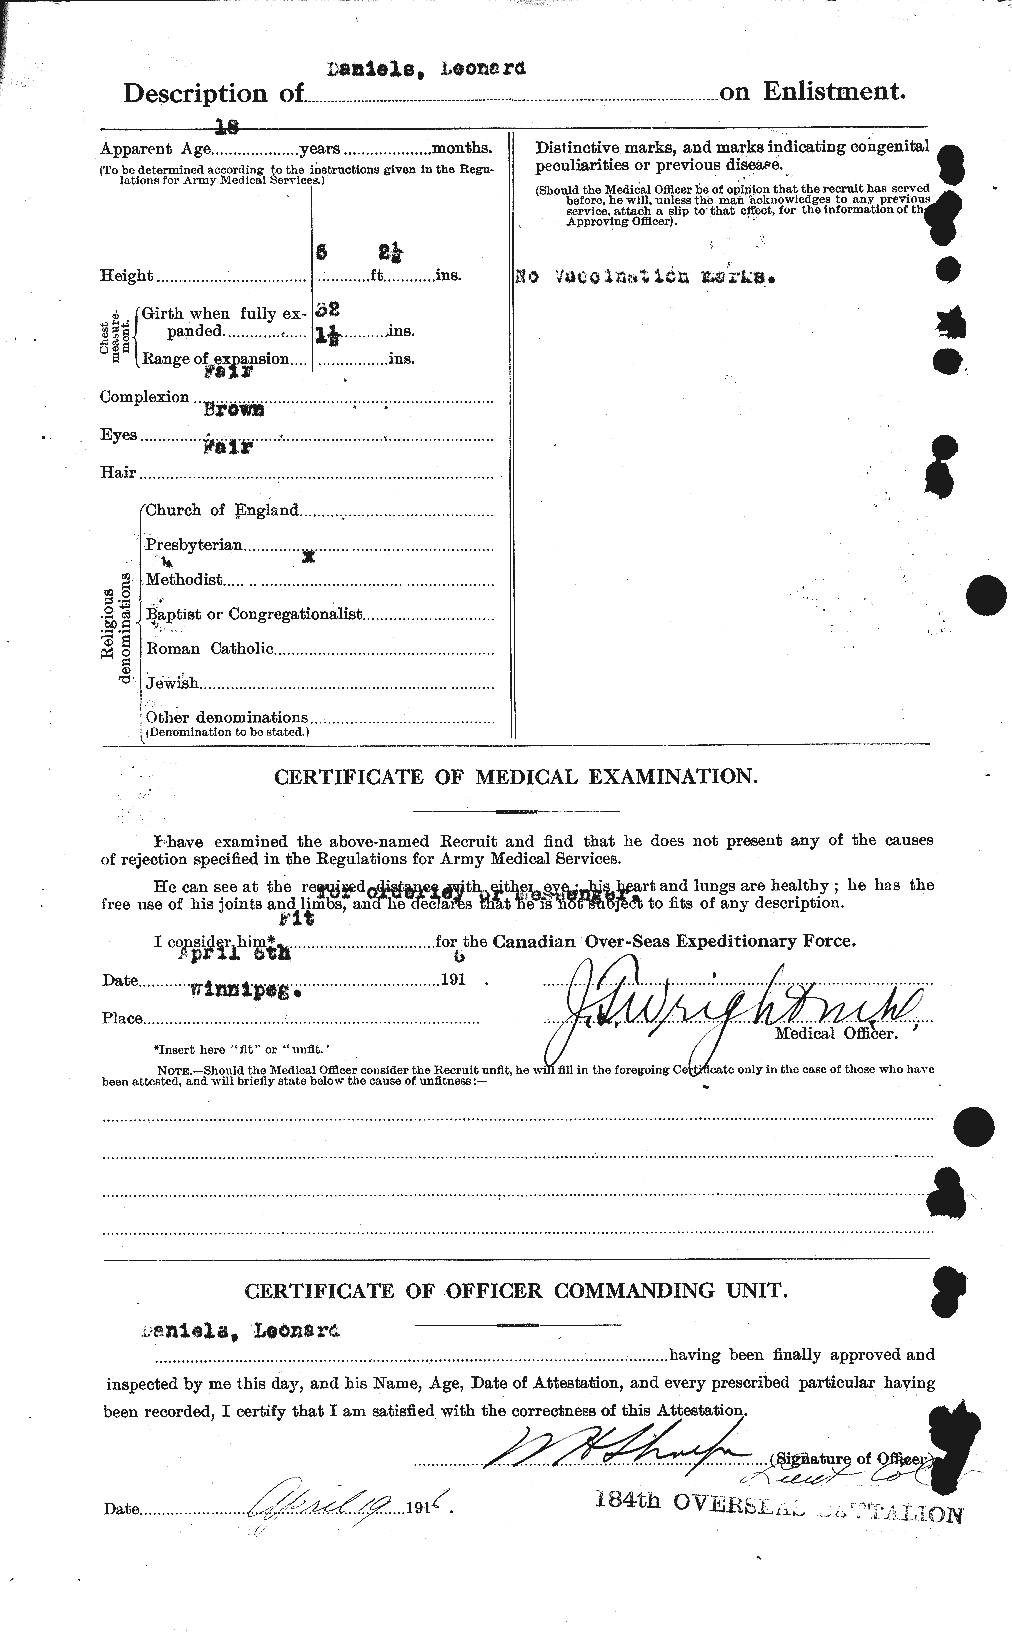 Personnel Records of the First World War - CEF 279651b